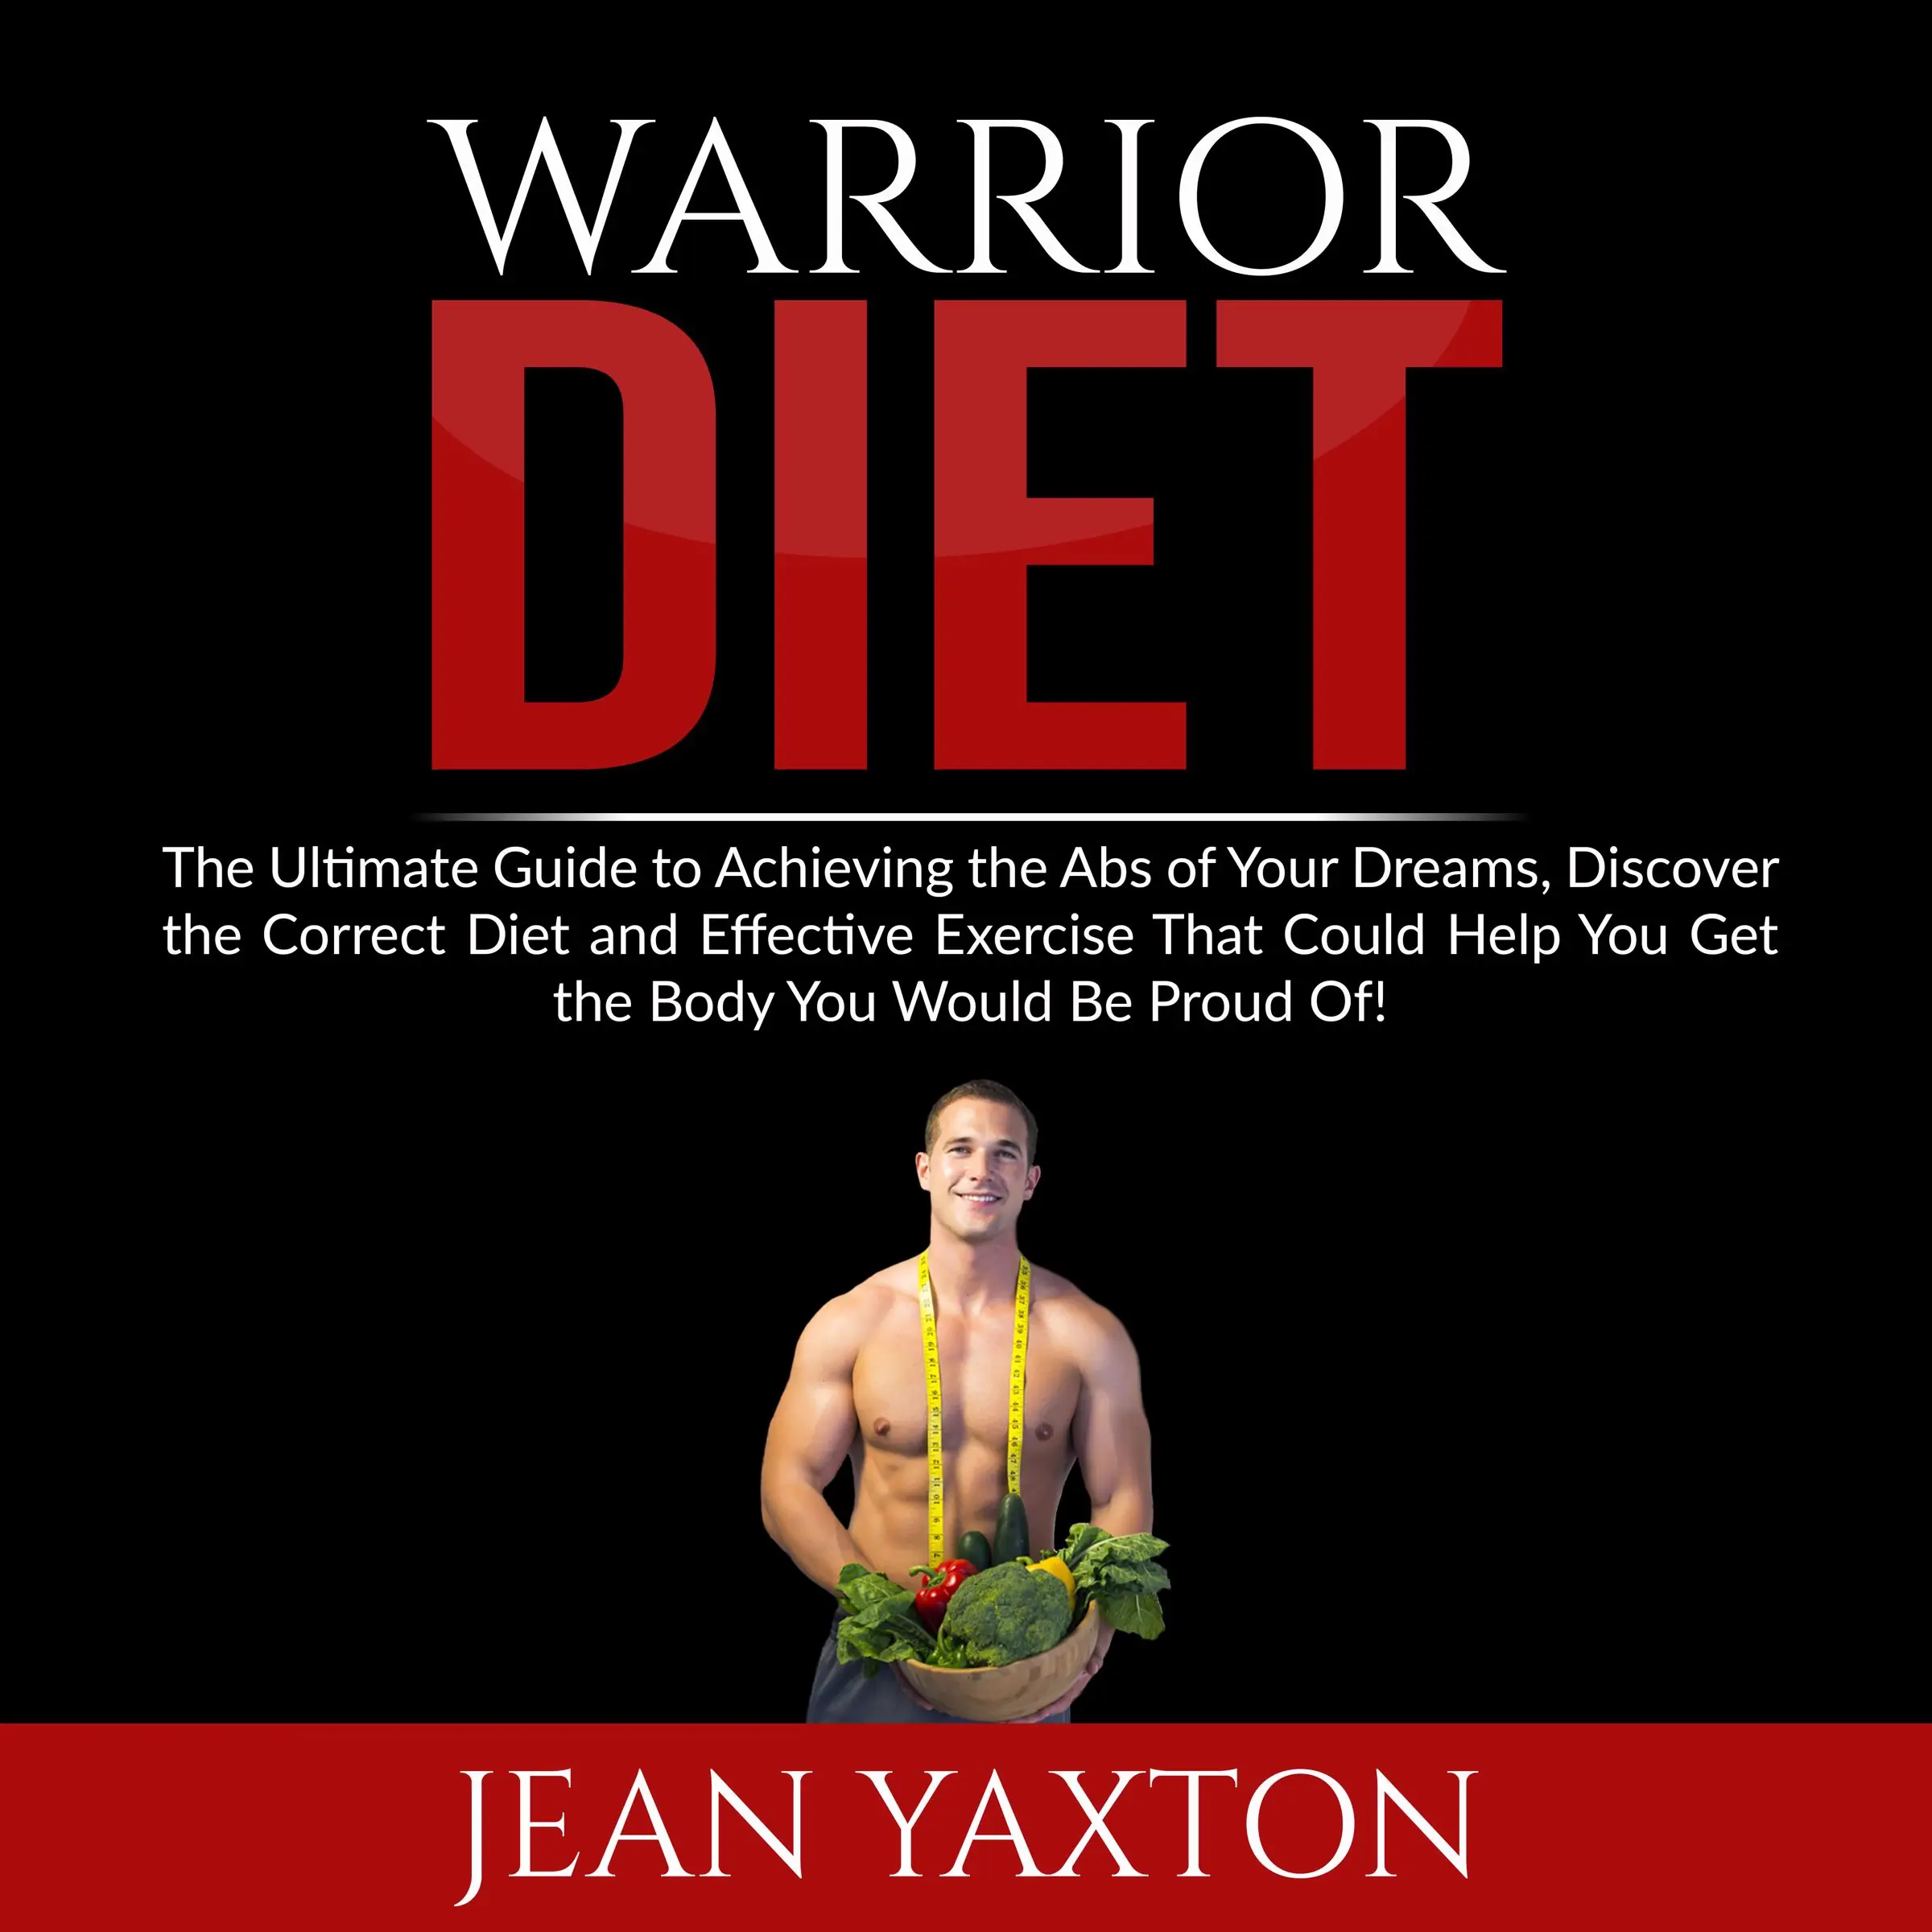 Warrior Diet: The Ultimate Guide to Achieving the Abs of Your Dreams, Discover the Correct Diet and Effective Exercise That Could Help You Get the Body You Would Be Proud Of! Audiobook by Jean Yaxton